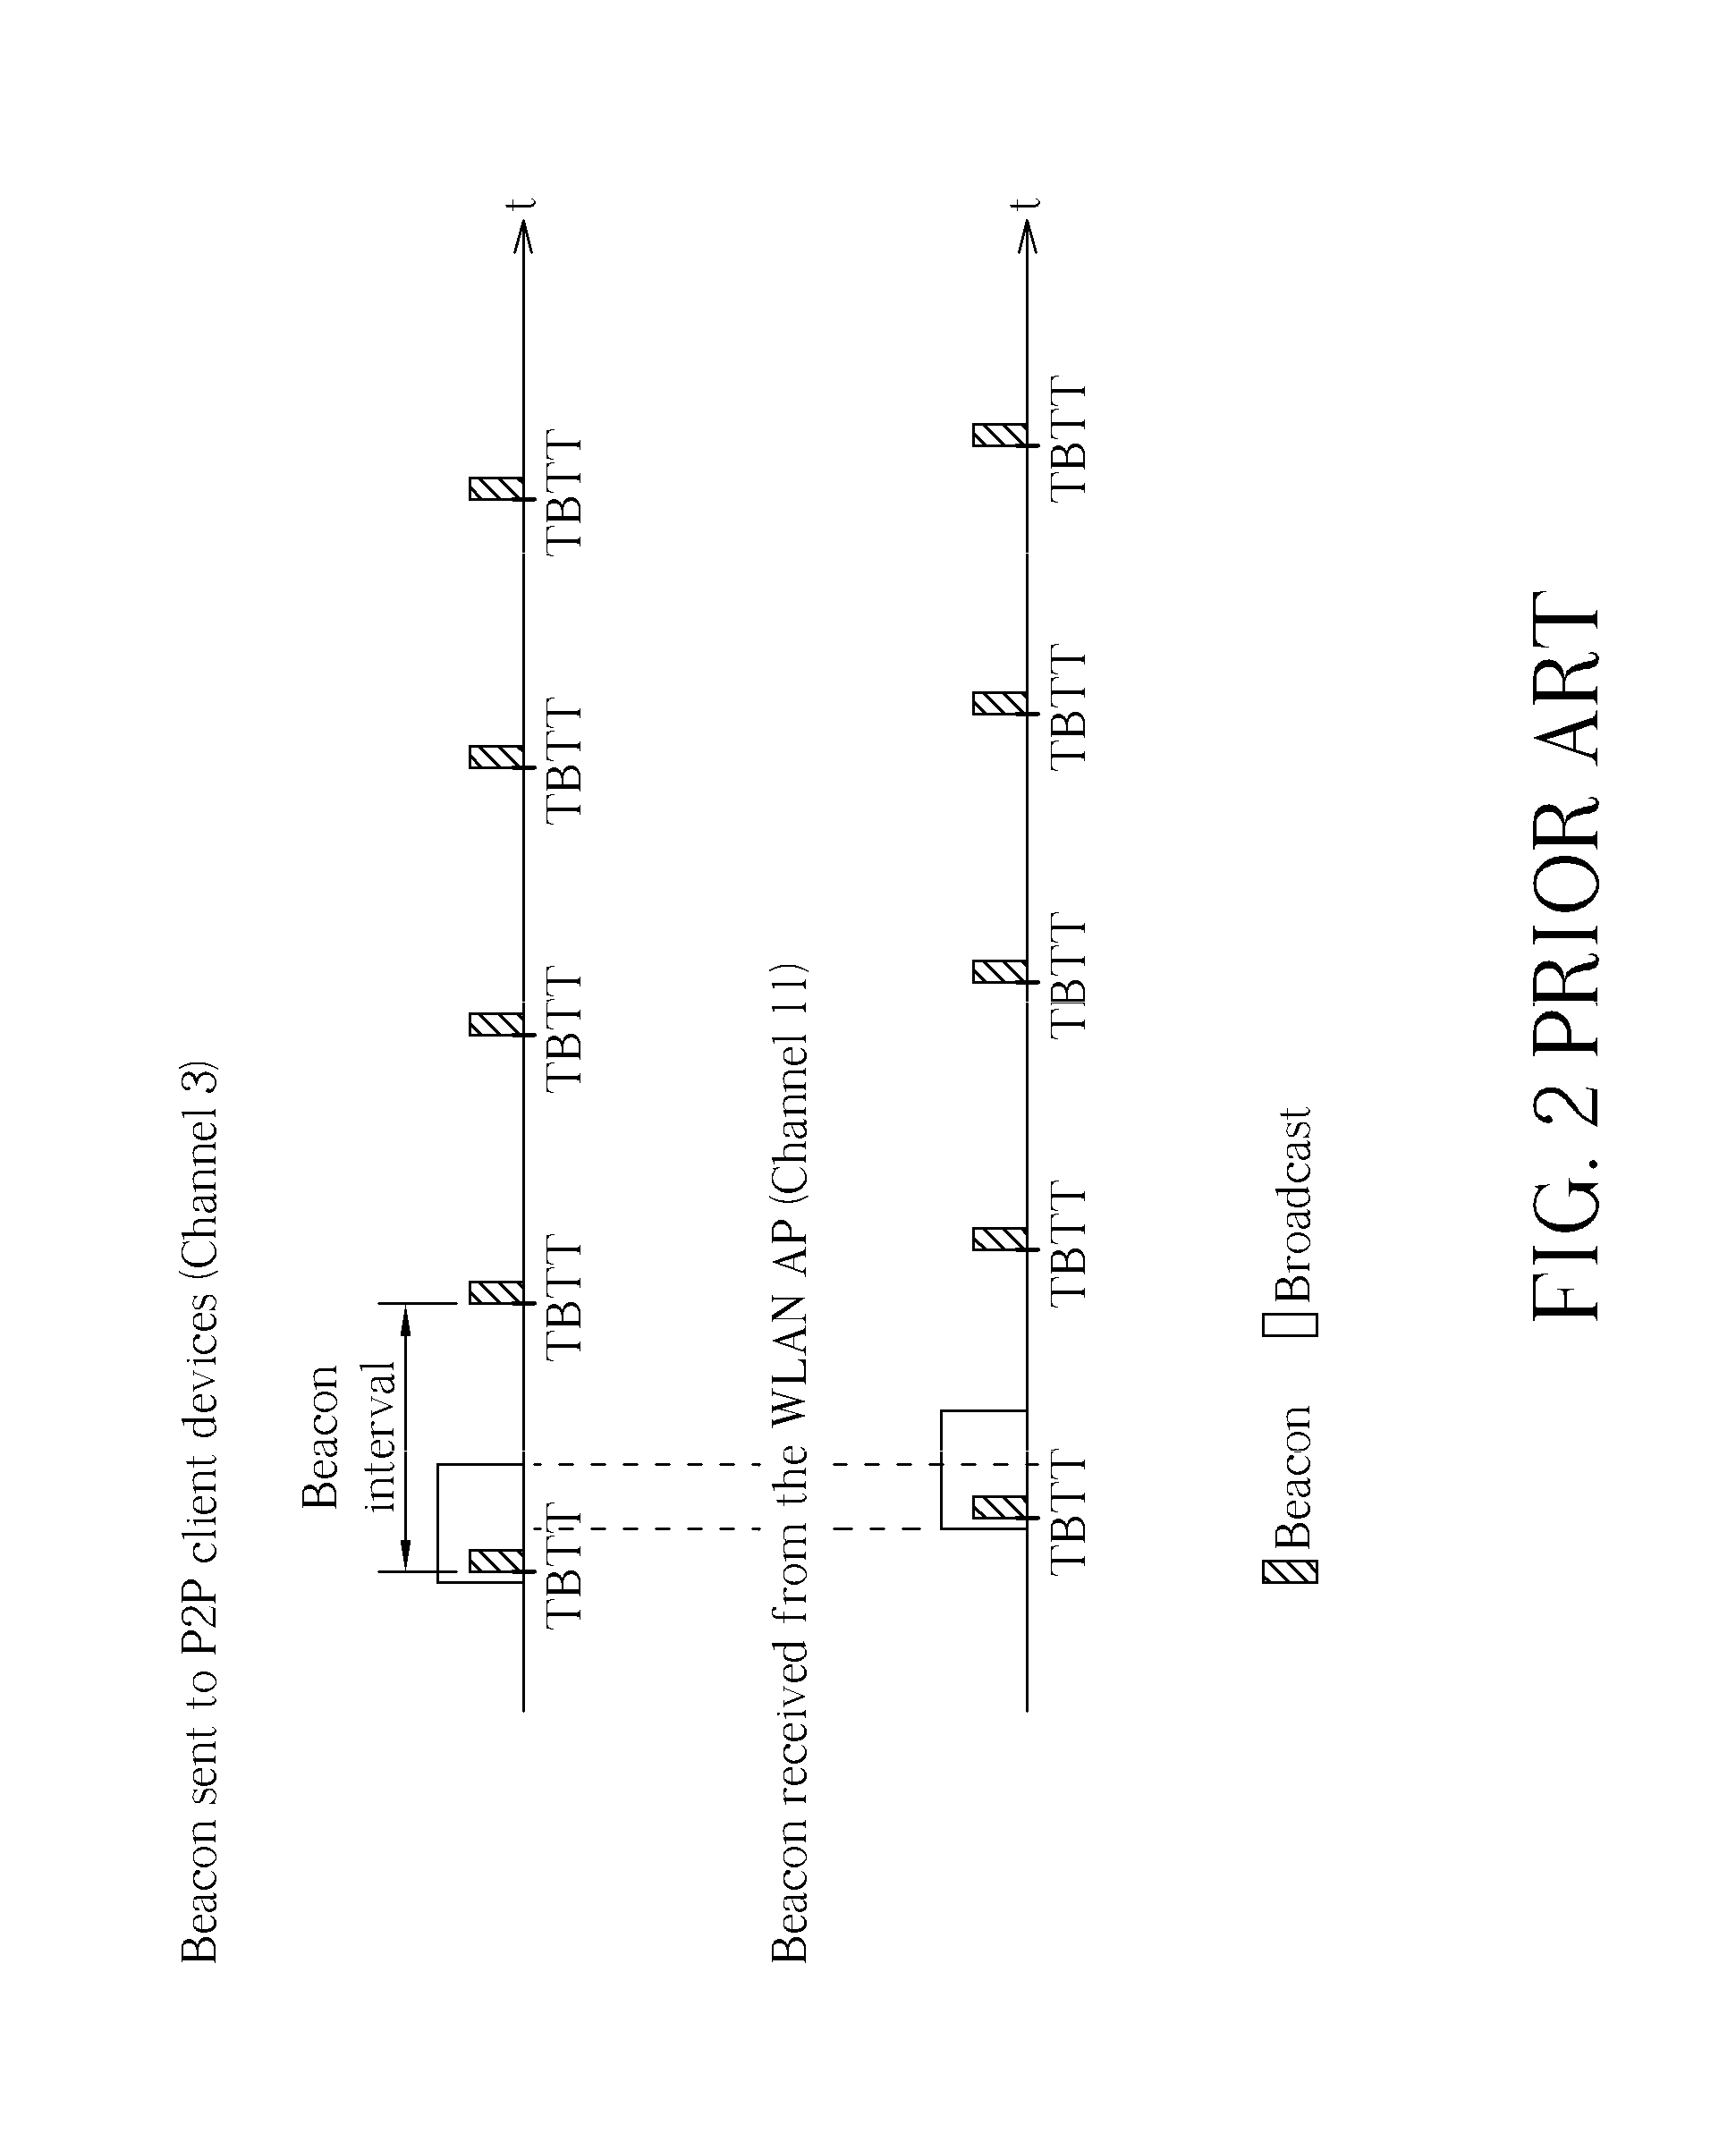 Concurrent control method for a communication device embedded with wi-fi direct